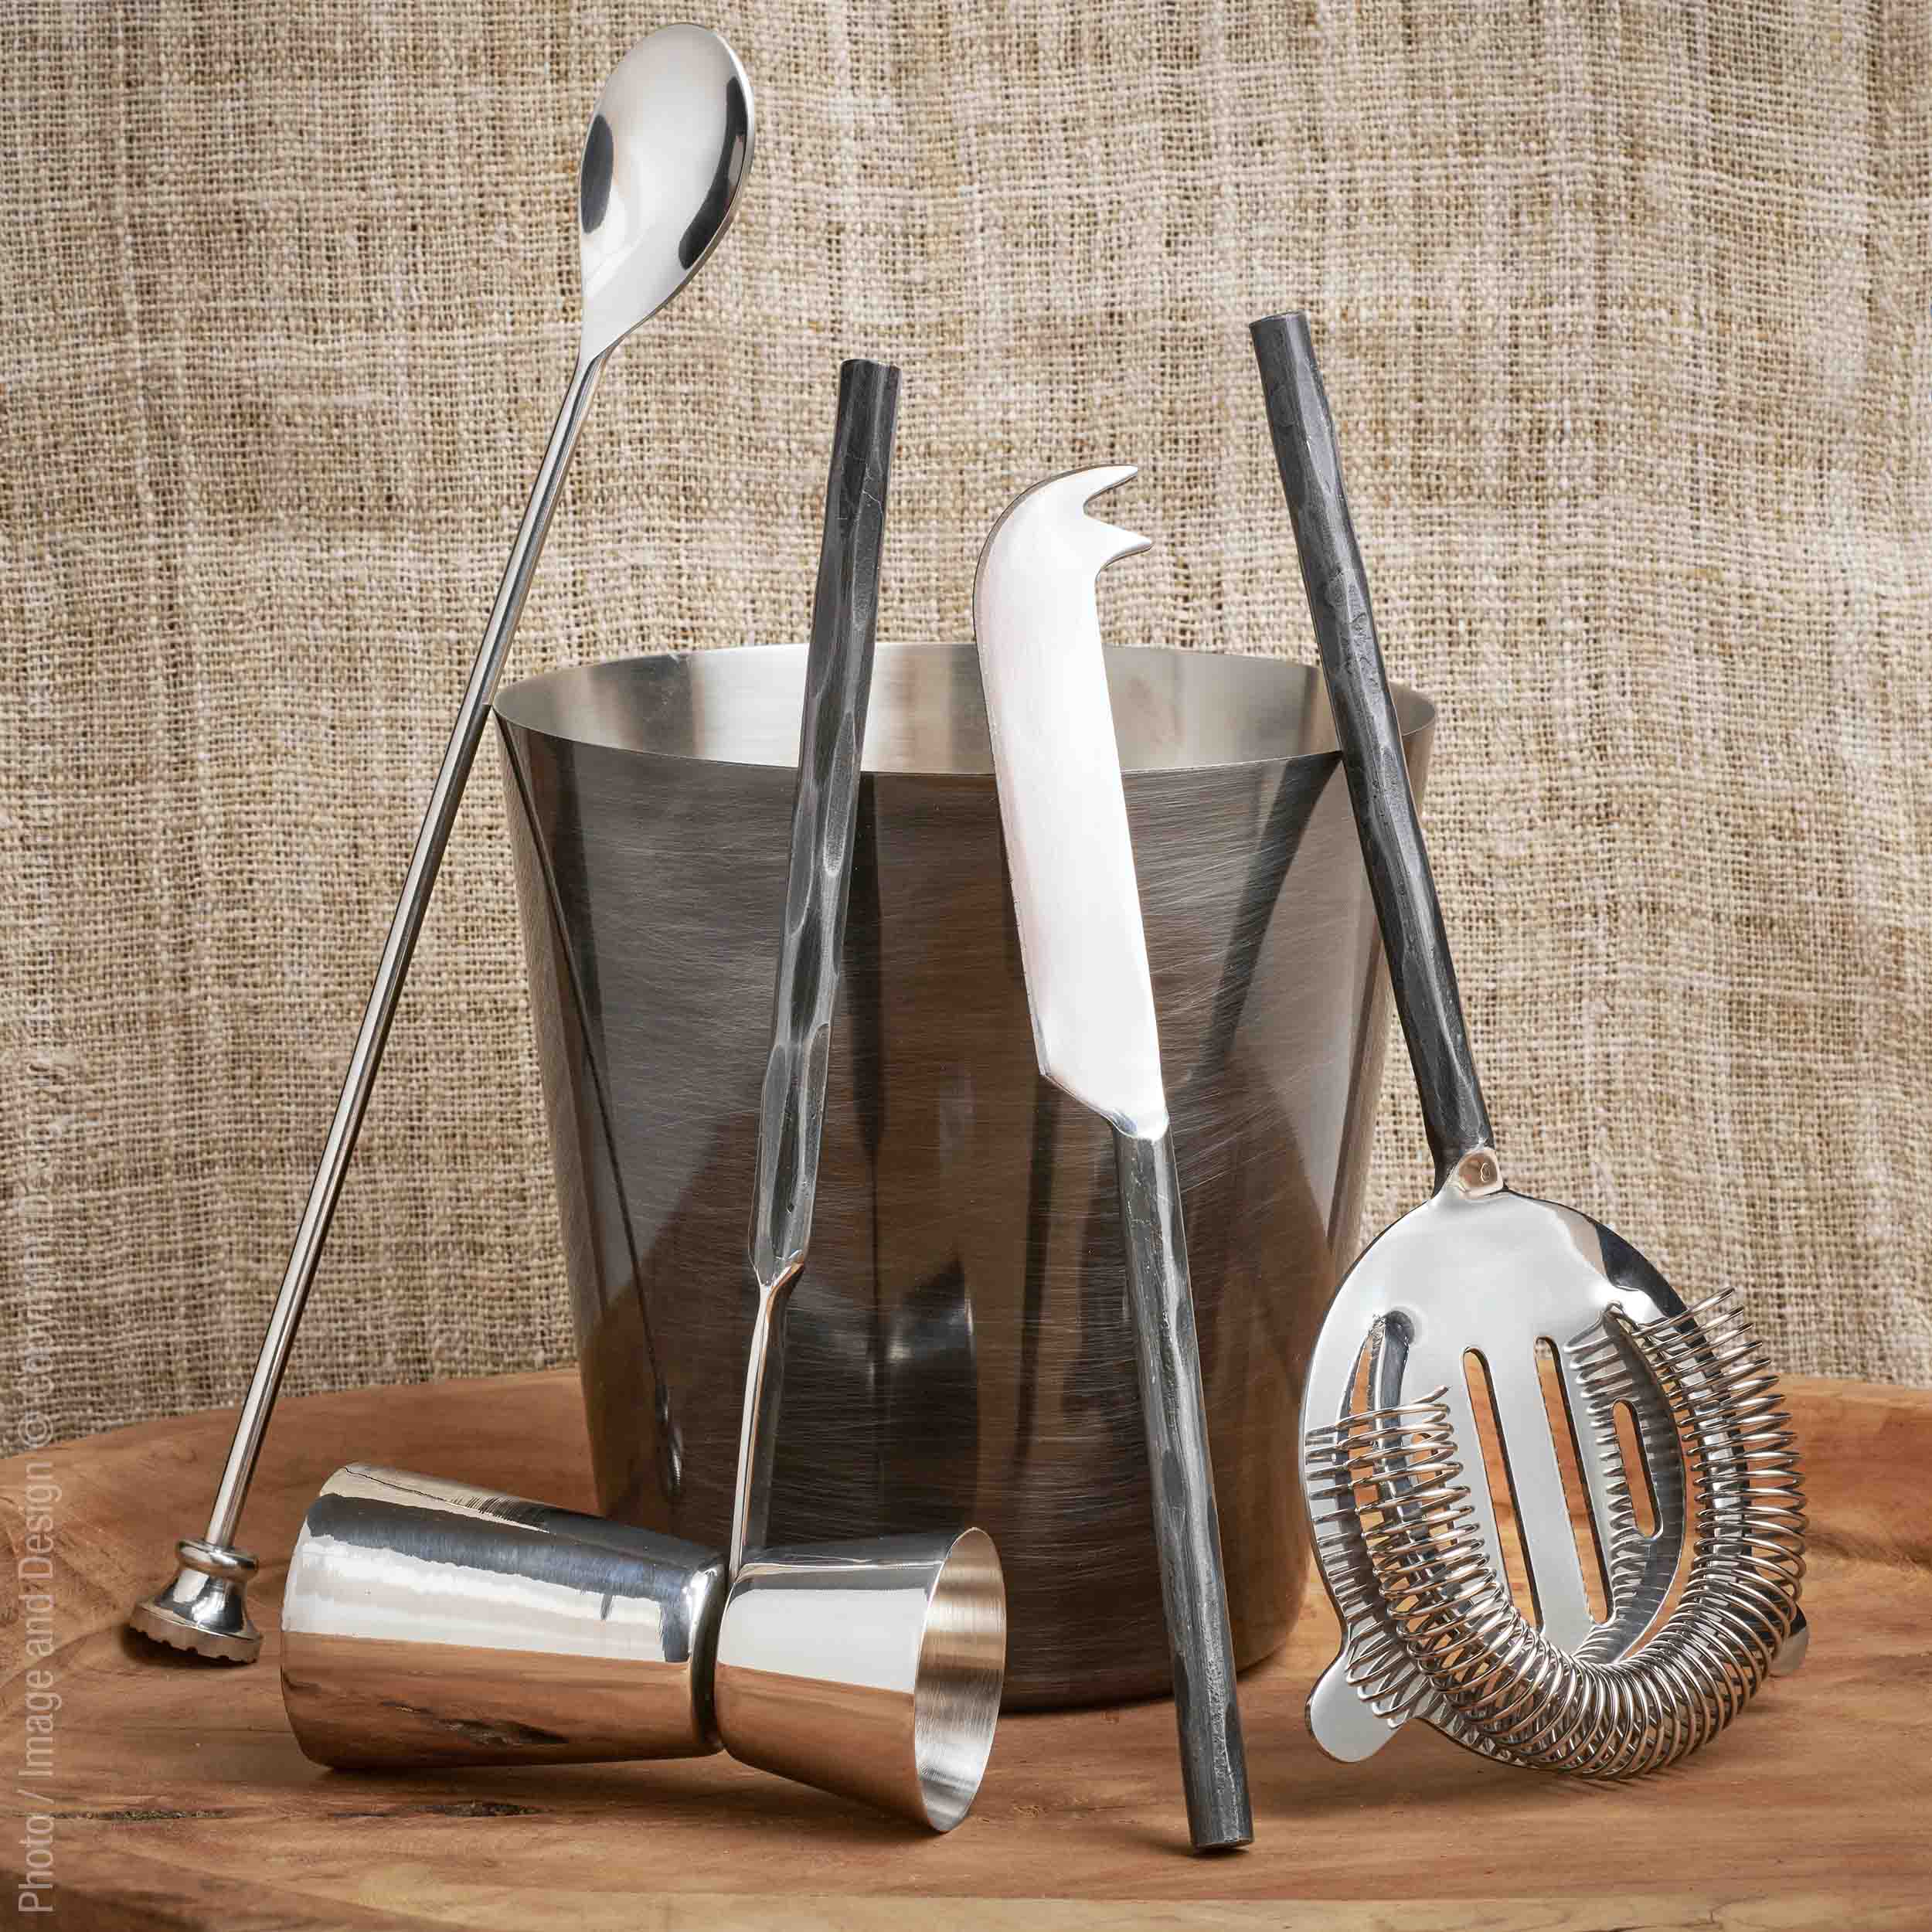 Tomini™ barware (set of 5) - Silver | Image 1 | Premium Utensils from the Tomini collection | made with Stainless Steel for long lasting use | texxture